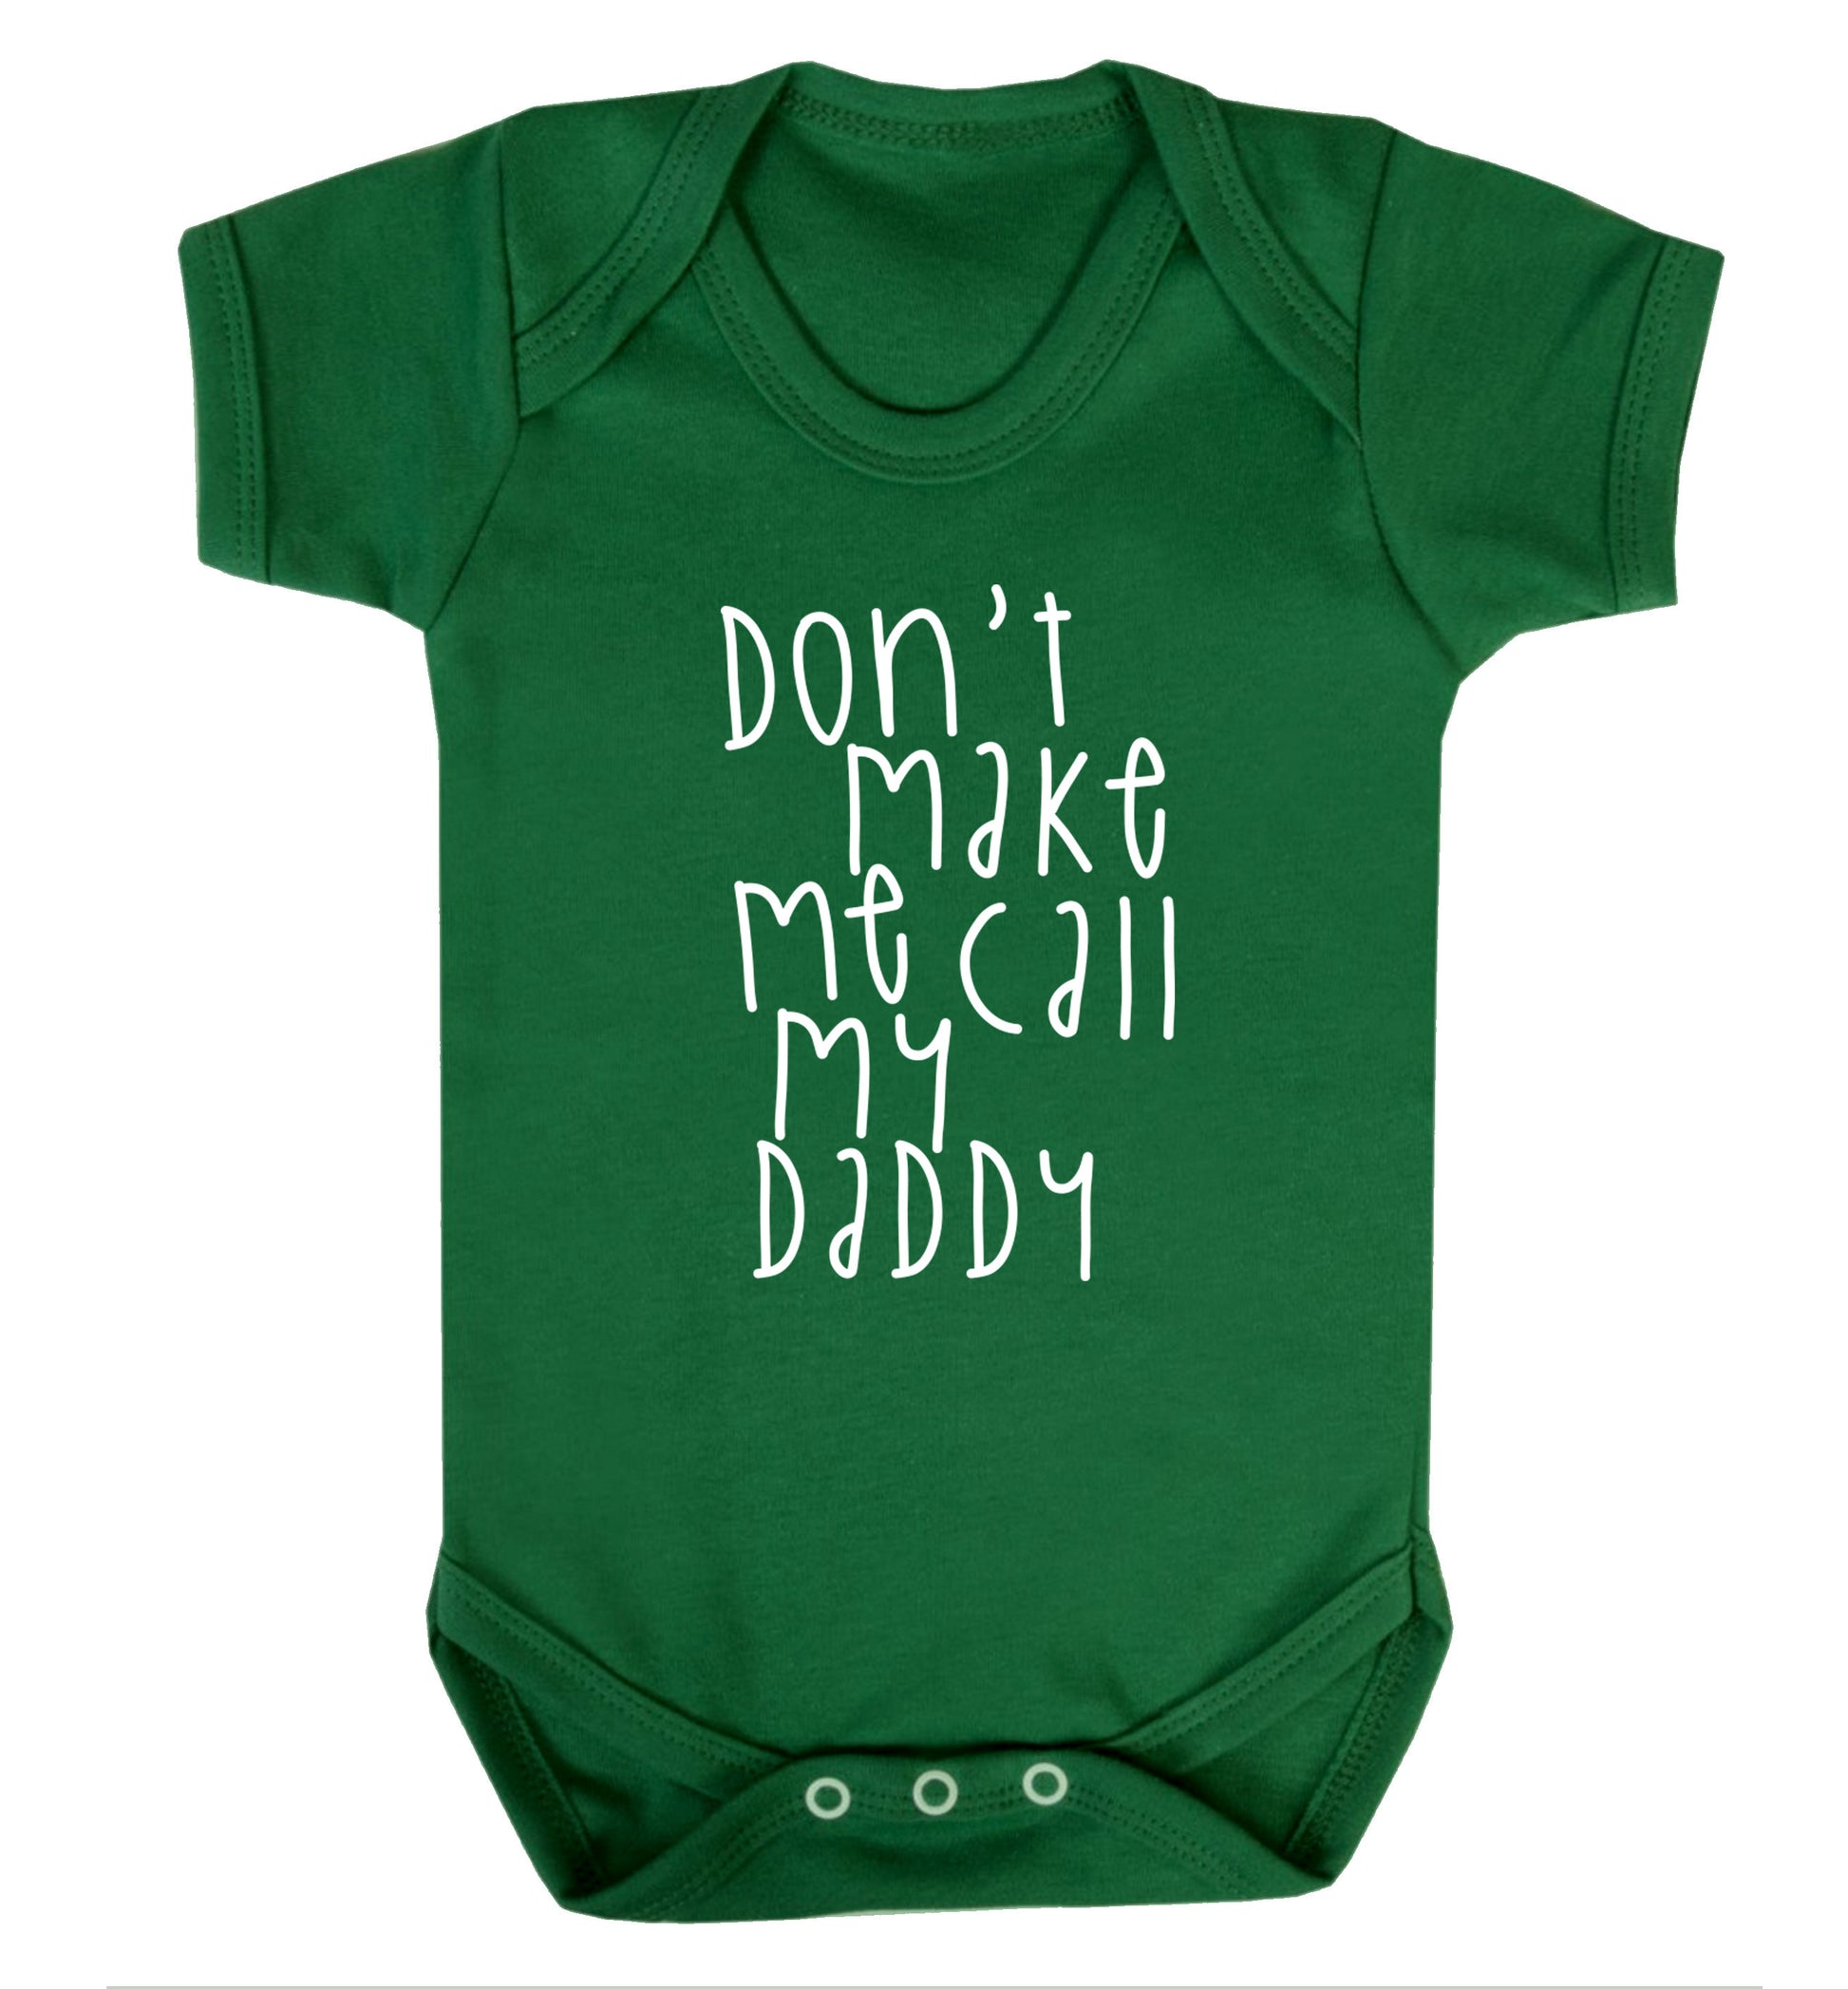 Don't make me call my daddy Baby Vest green 18-24 months